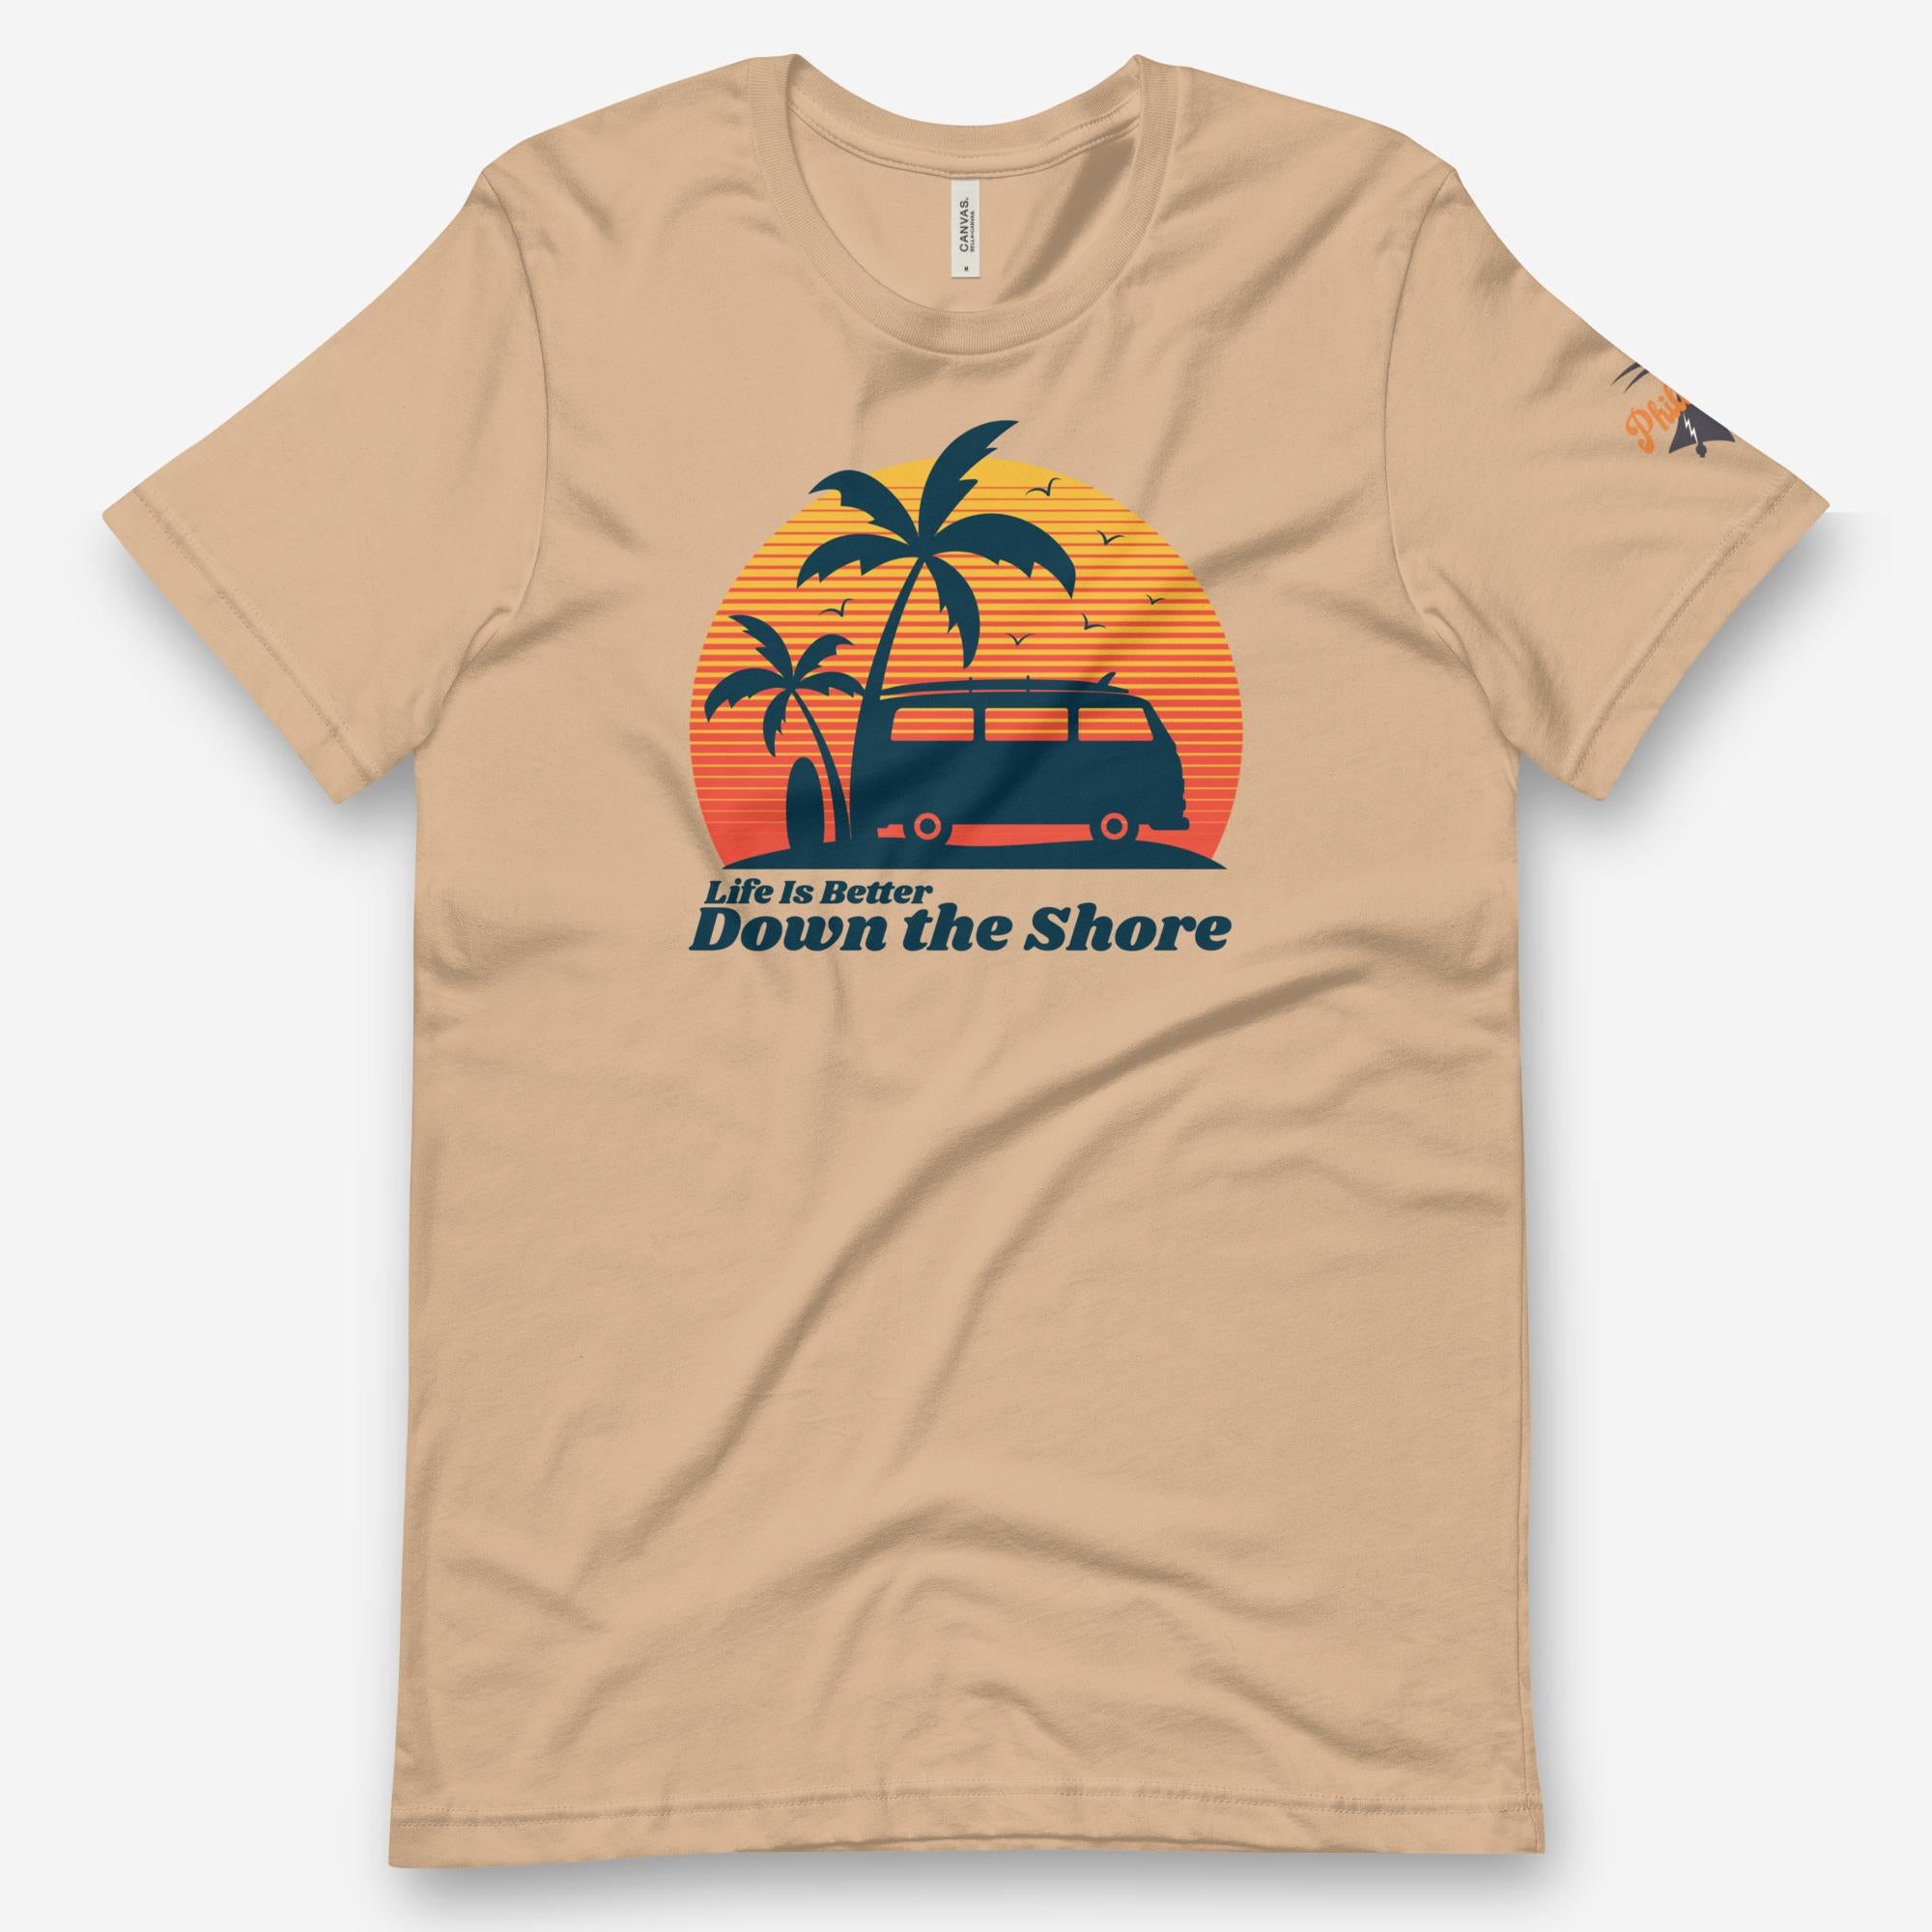 "Life Is Better Down the Shore" Tee